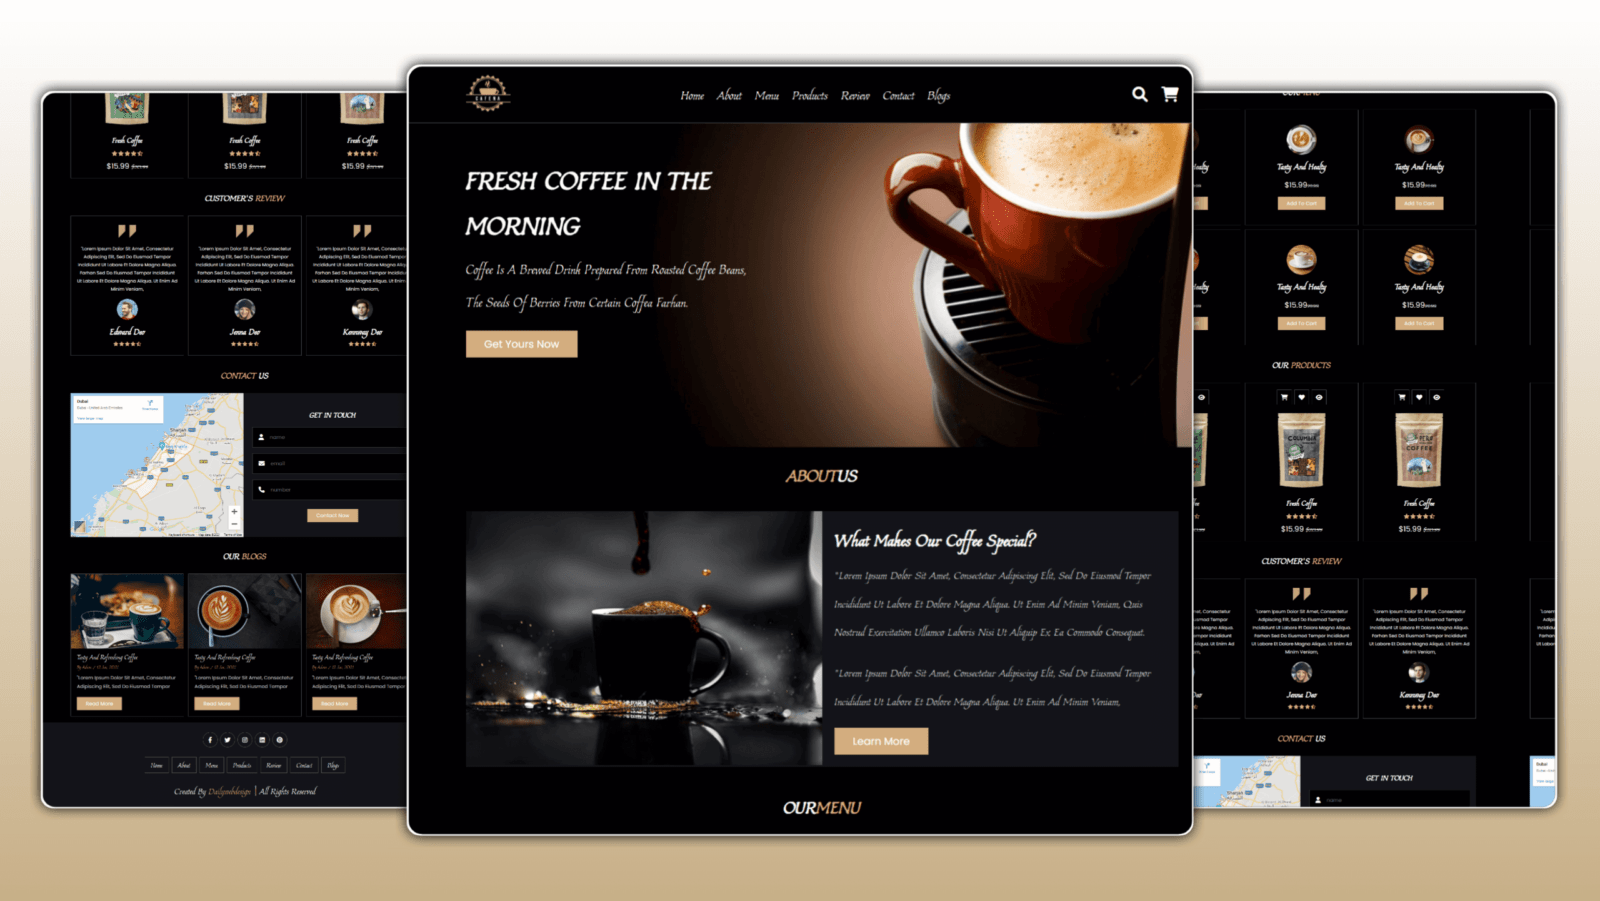 Responsive coffee shop website Design using HTML CSS & JAVASCRIPT with source code